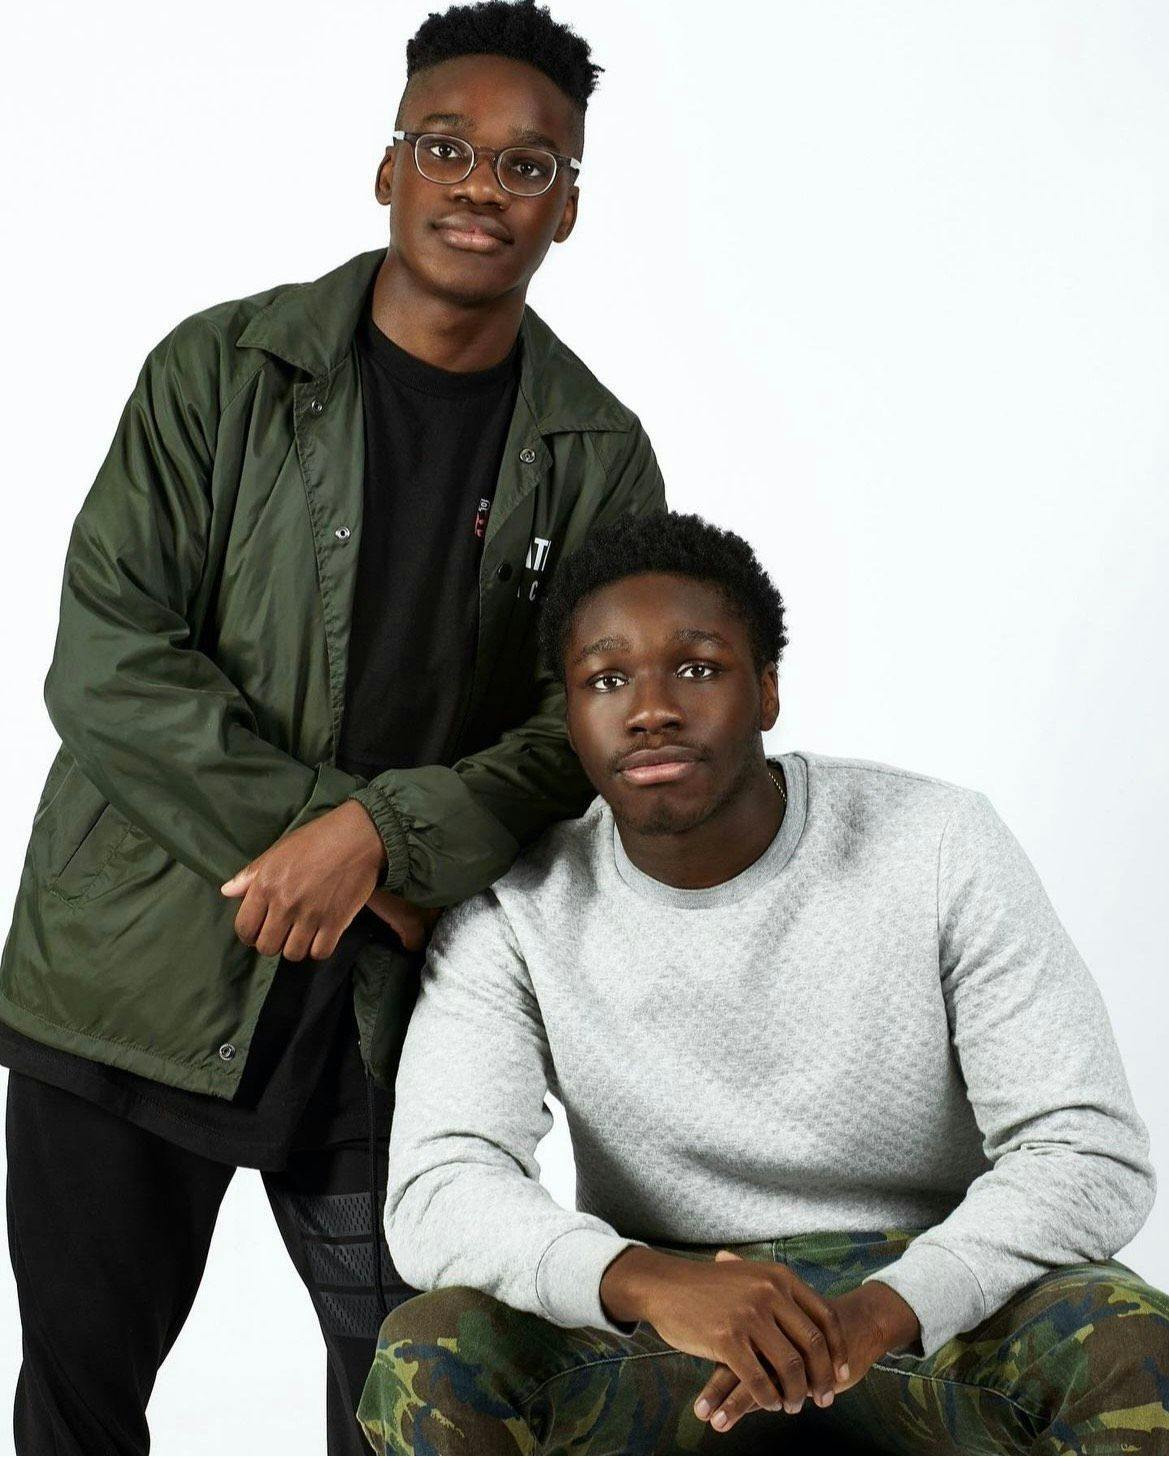 Egodi “Love” Ulinwa (right) and his younger brother, Liight (left)